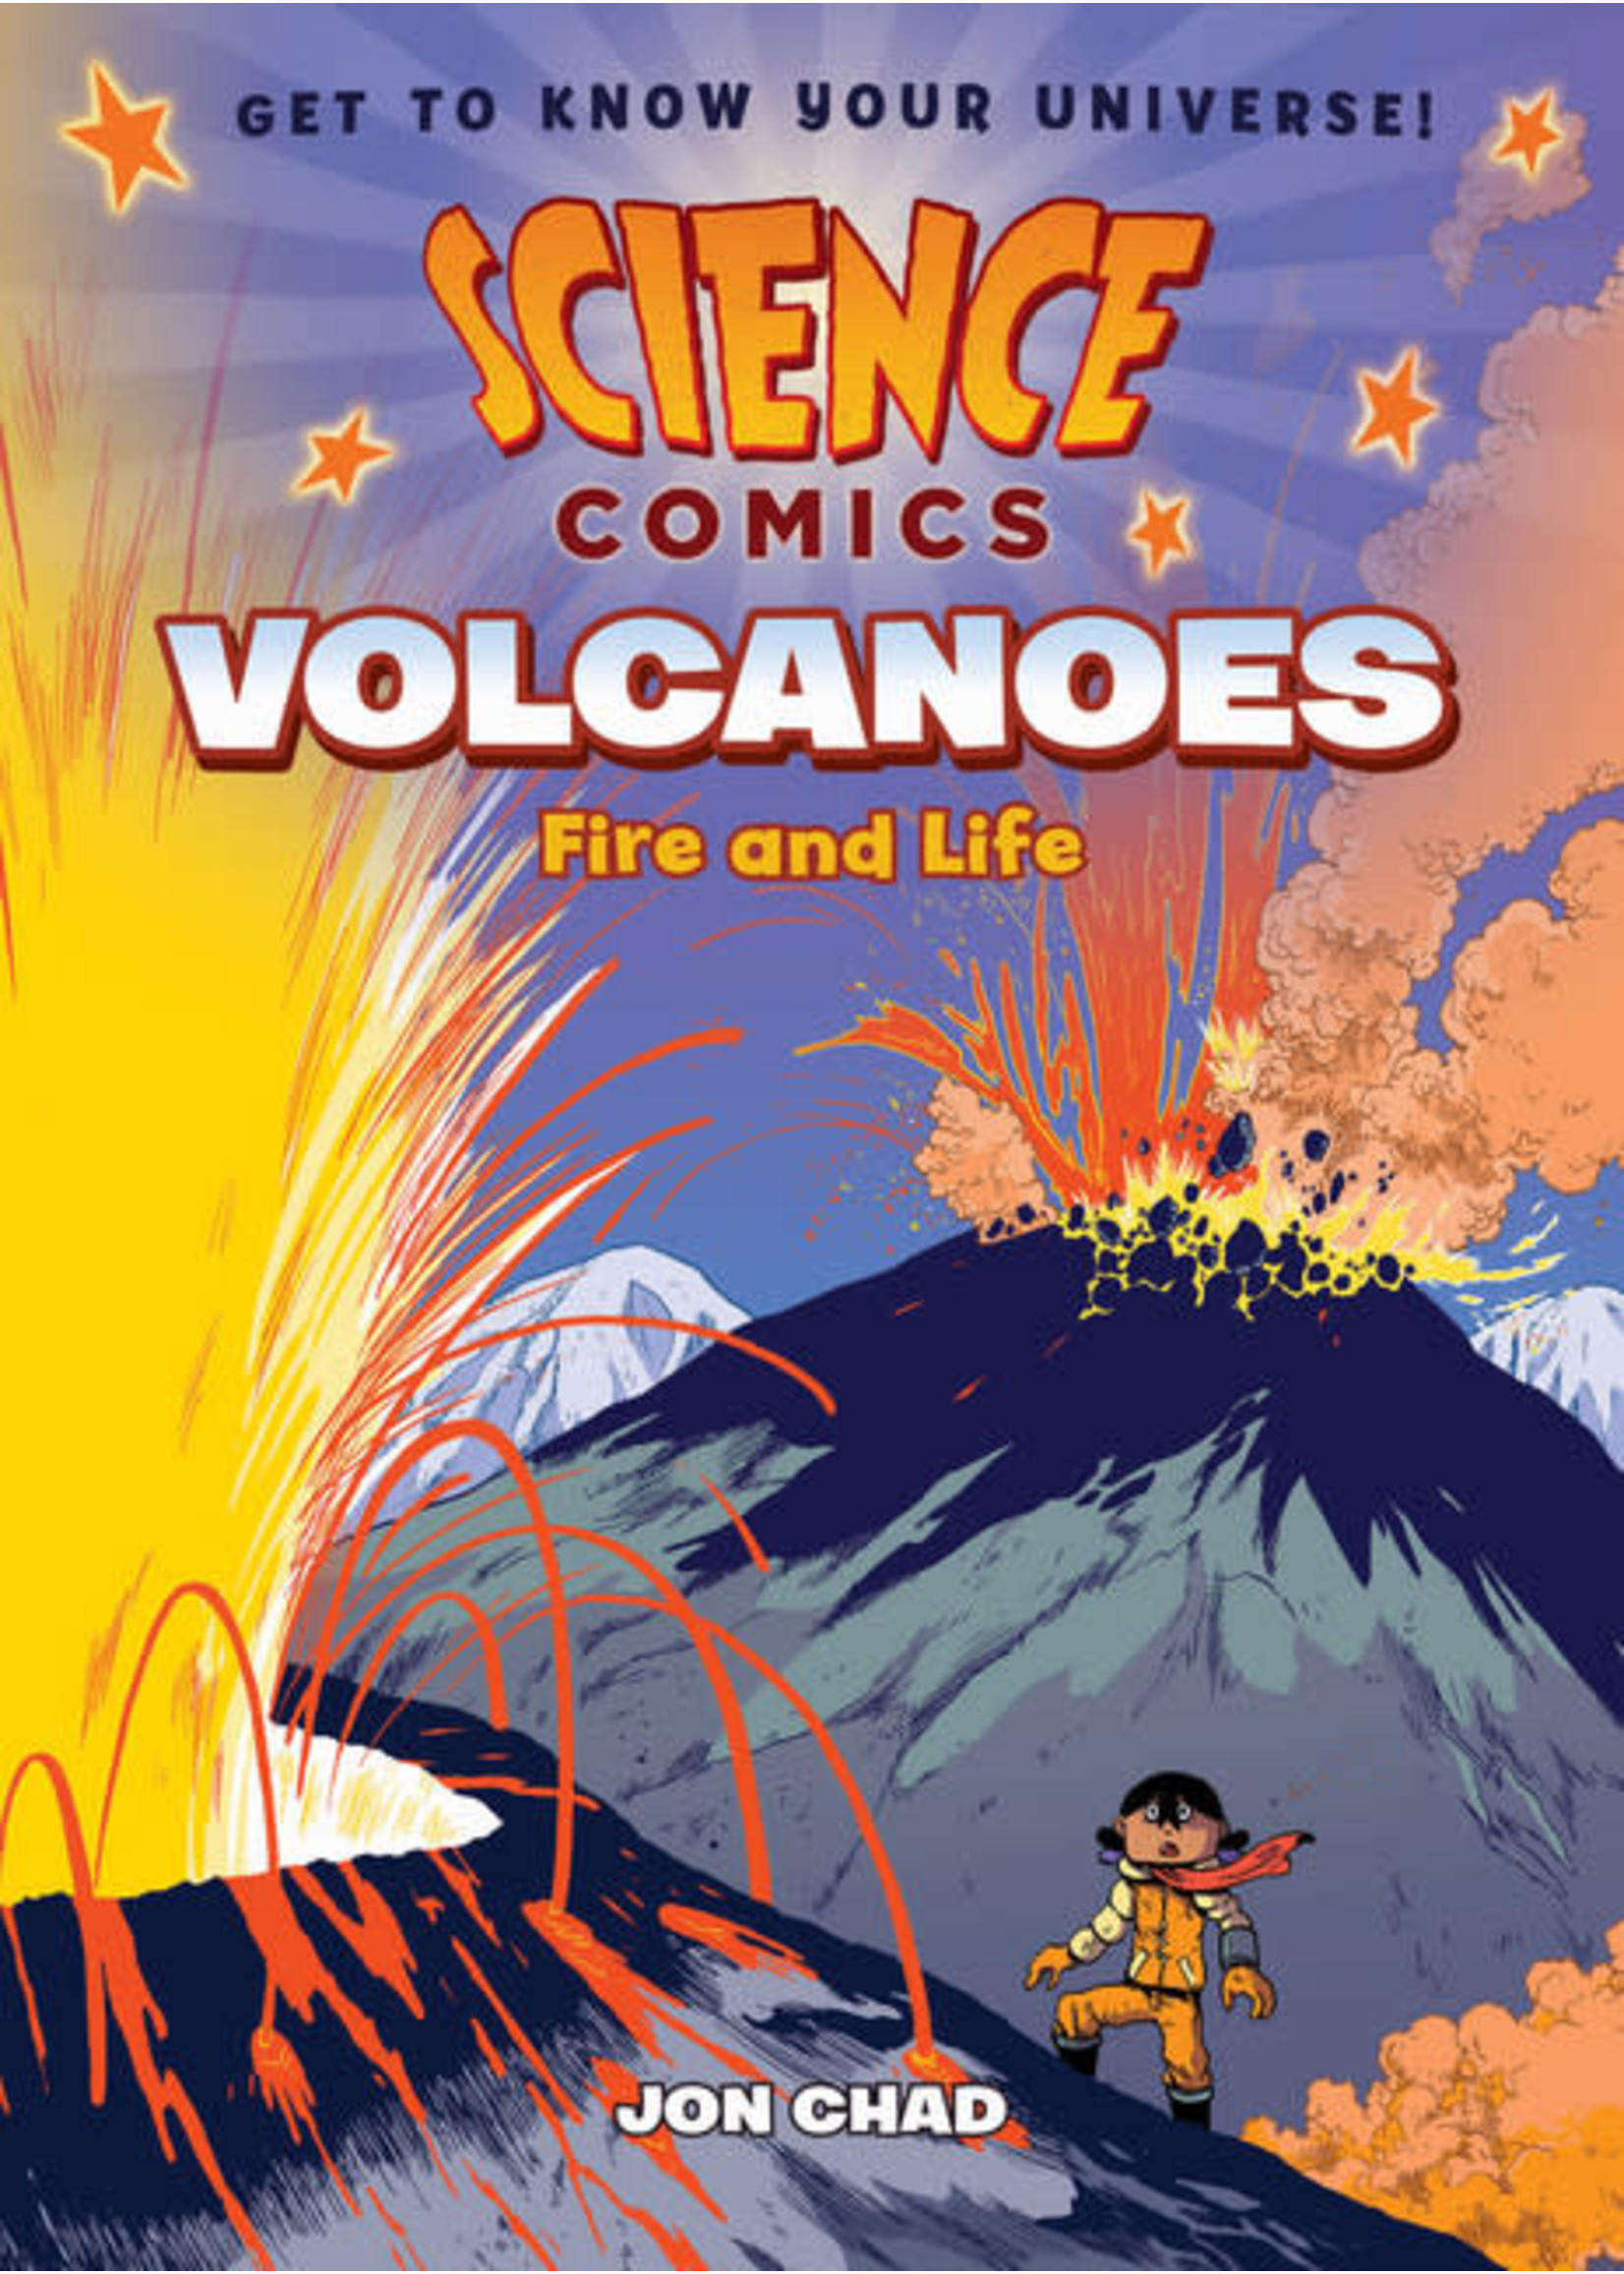 Science Comics: Volcanoes - Fire and Life by Jon Chad